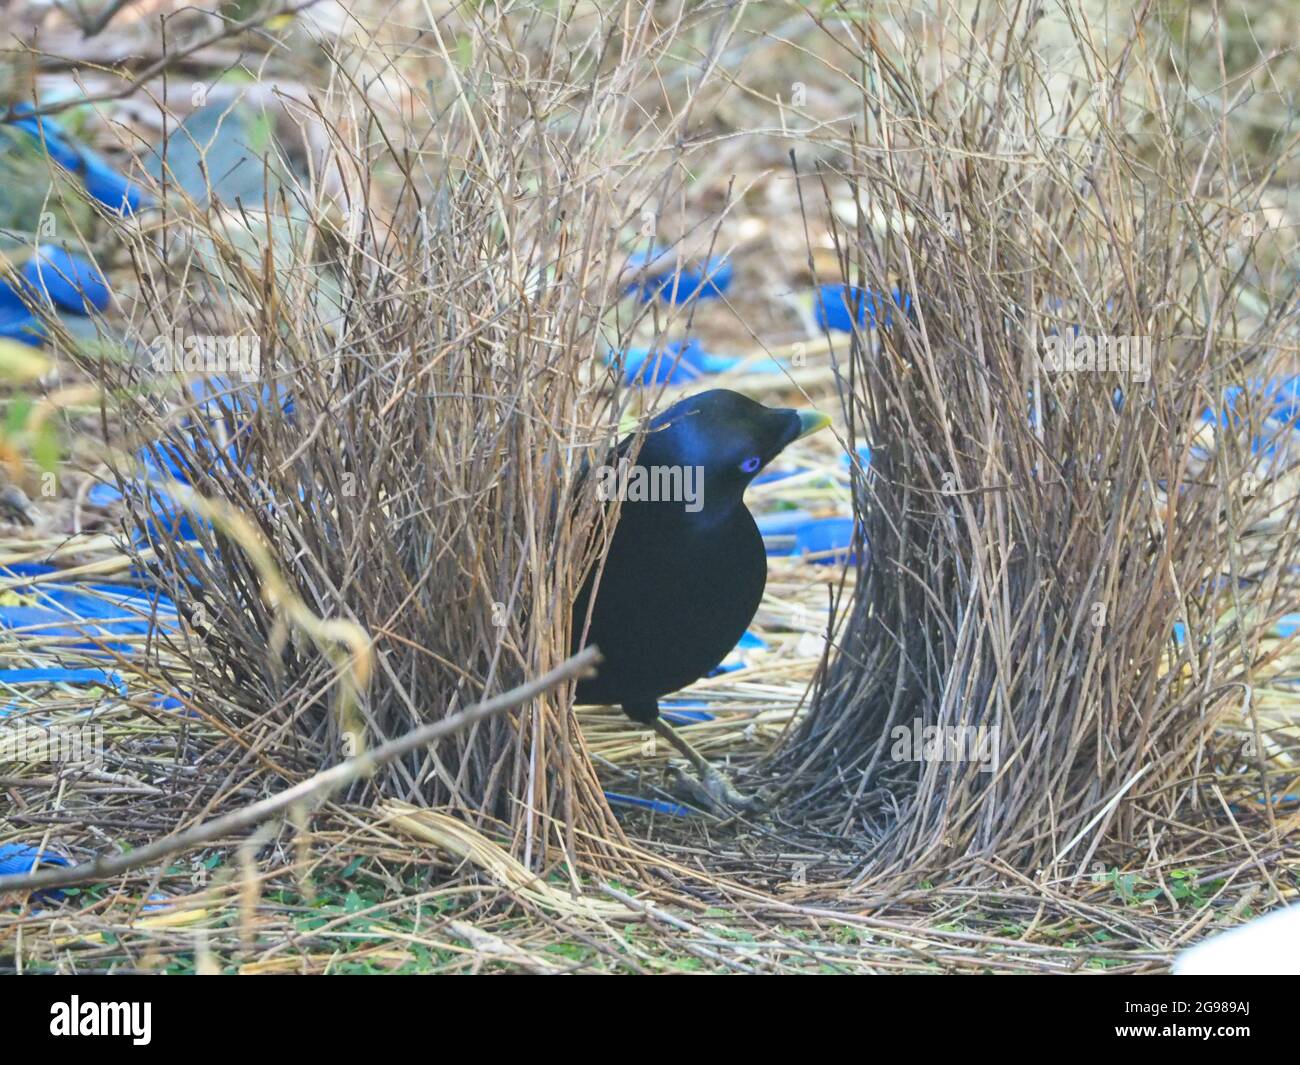 Bird.Satin Bowerbird with his Bower, 2 parallel walls of sticks decorated with collection of blue objects or treasures to impress prospective females Stock Photo